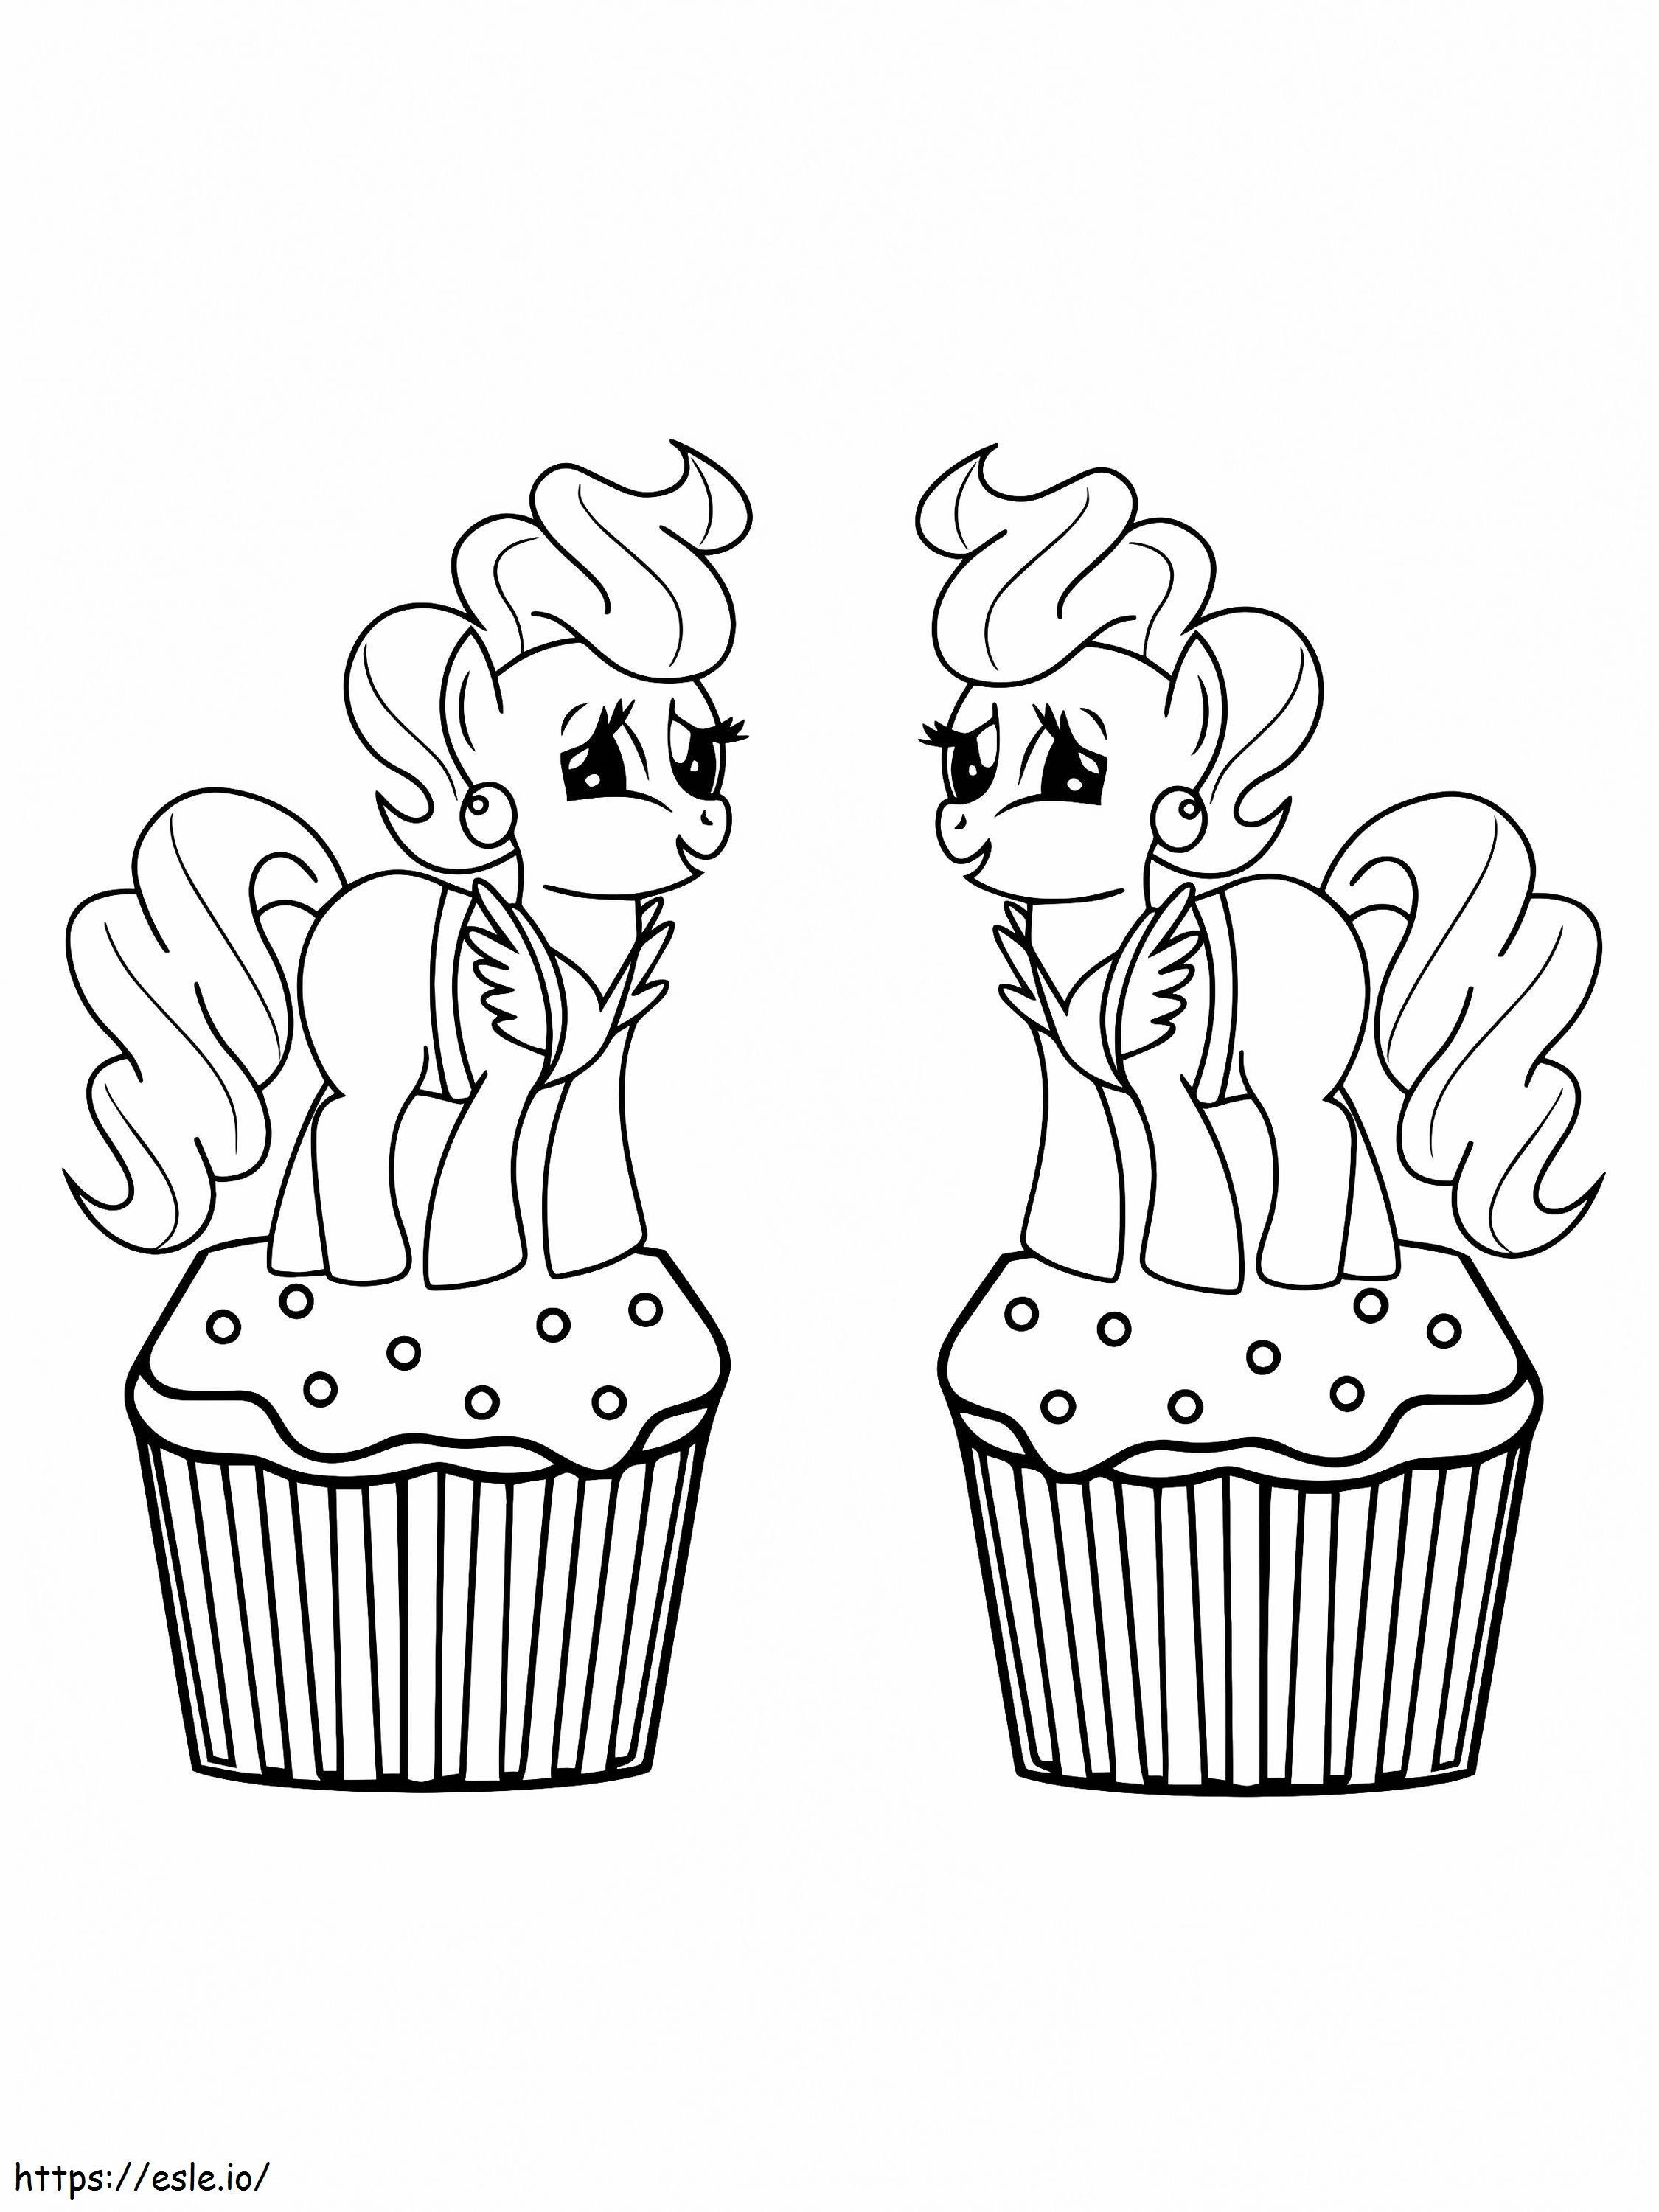 Two Mrs Cake On The Cupcakes de colorat